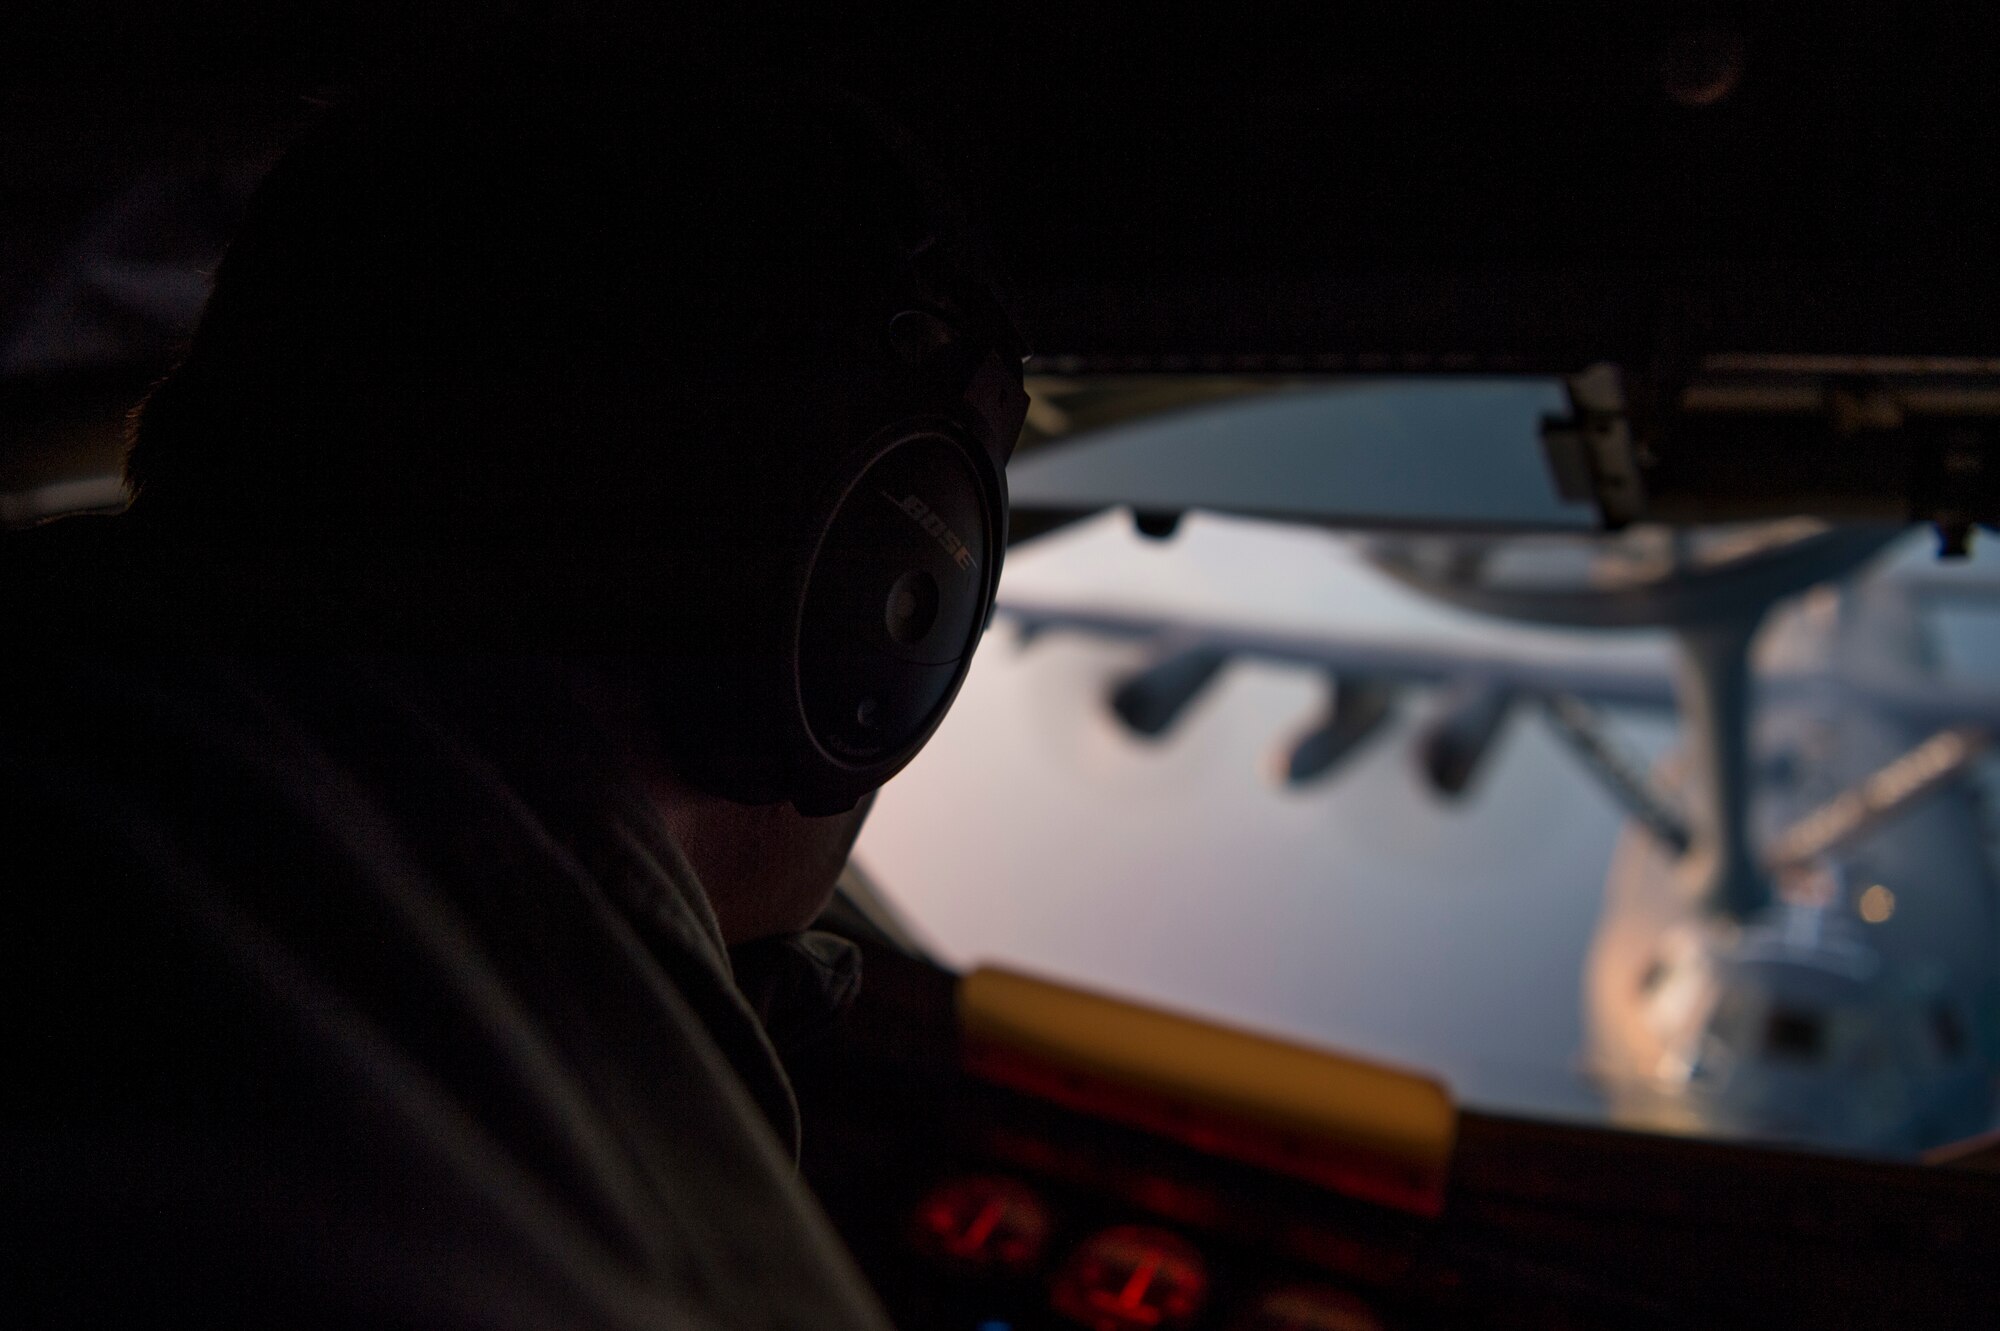 U.S. Air Force Staff Sgt. Jeffrey Michal, a 50th Air Refueling Squadron boom operator, refuels an MC-130H Combat Talon II aircraft over the Gulf of Mexico in support of Exercise Emerald Warrior, Jan. 17, 2019.